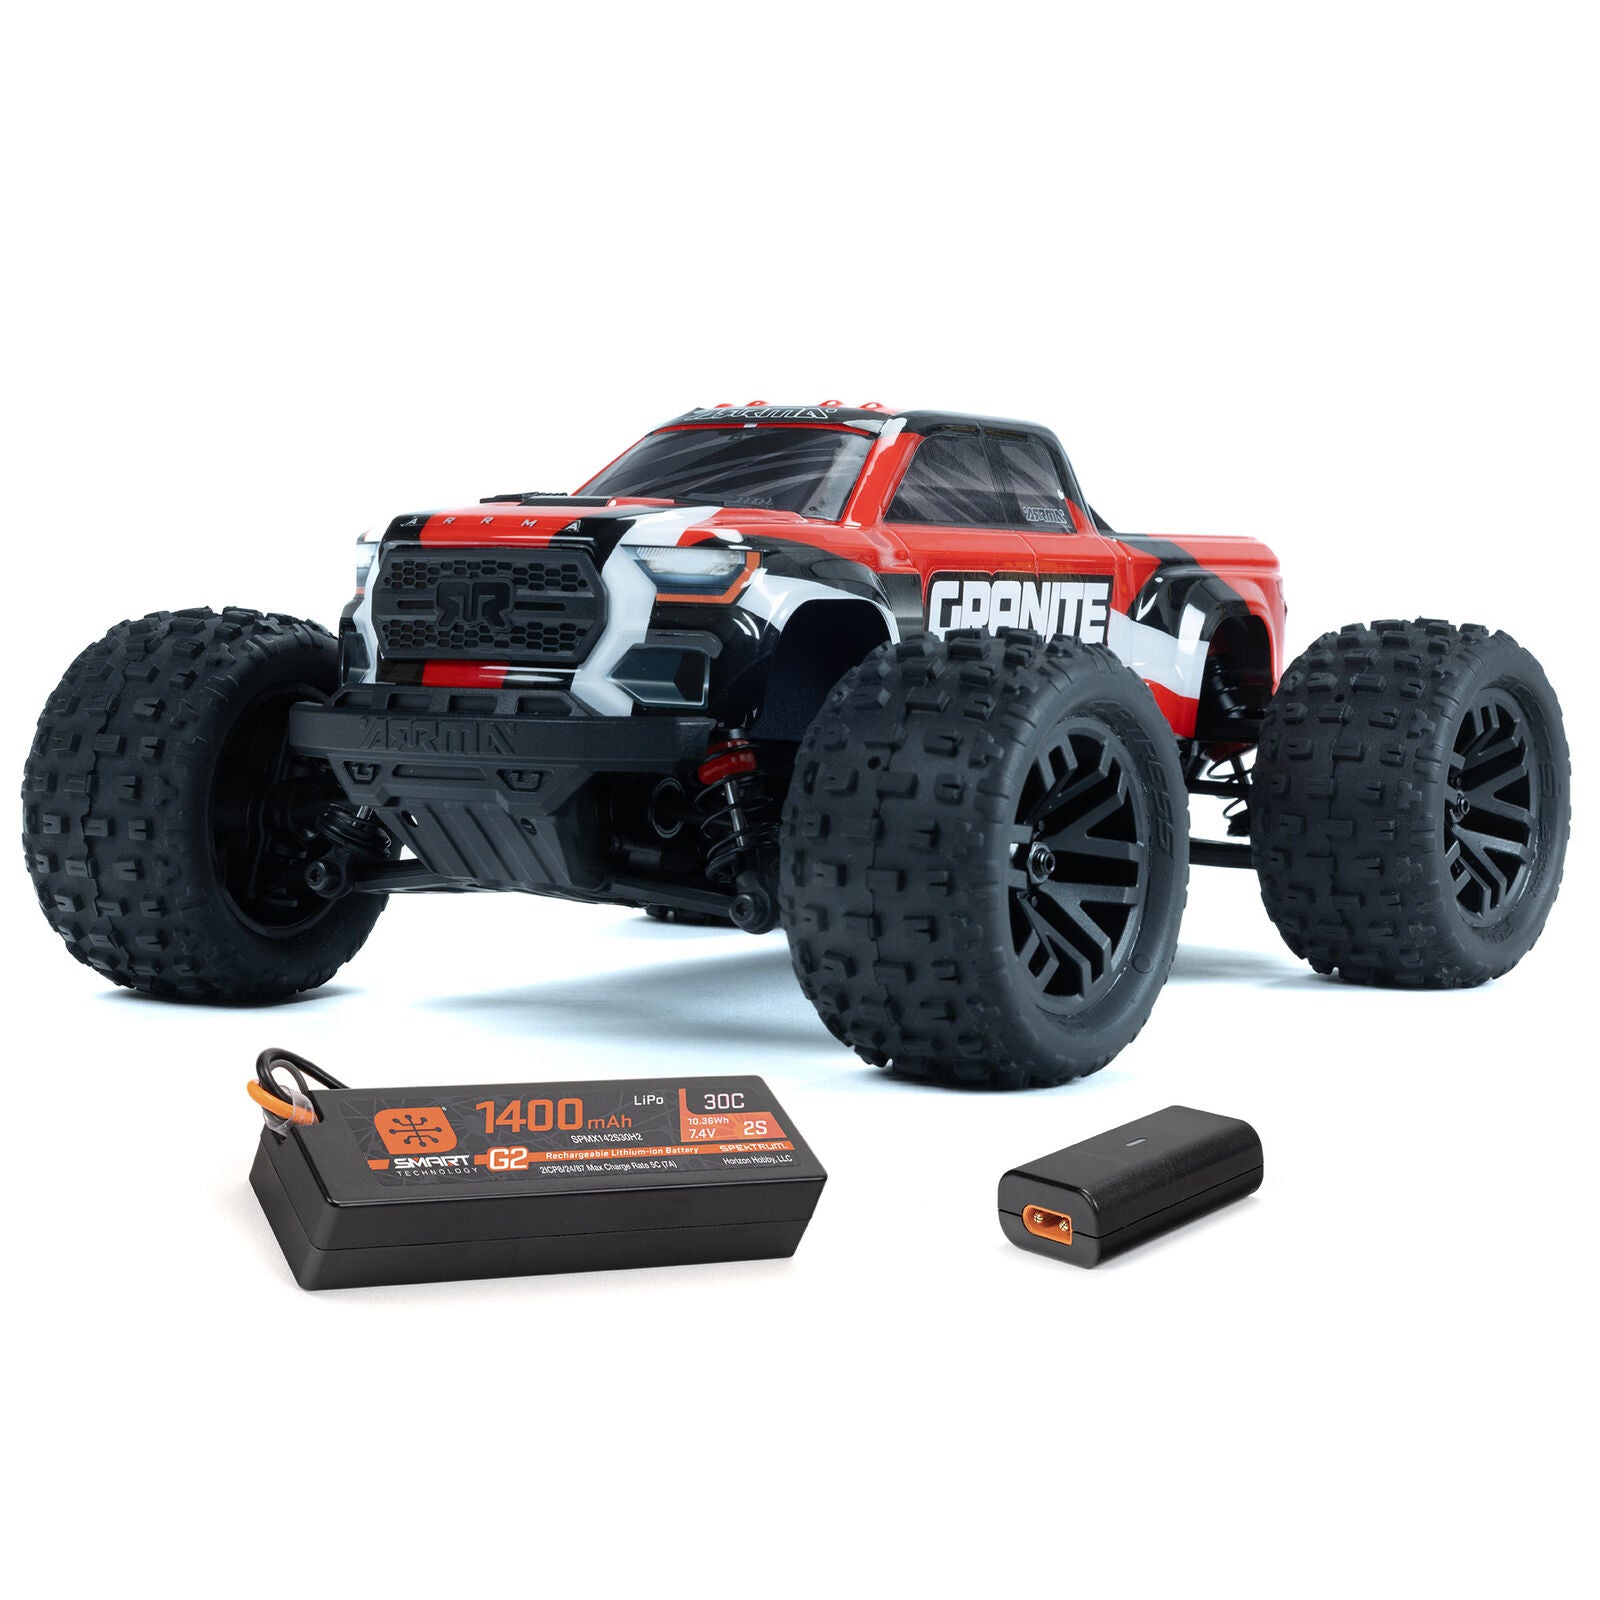 ARRMA ARA2102T2 1/18 GRANITE GROM MEGA 380 Brushed 4X4 Monster Truck RTR with Battery & Charger, Red